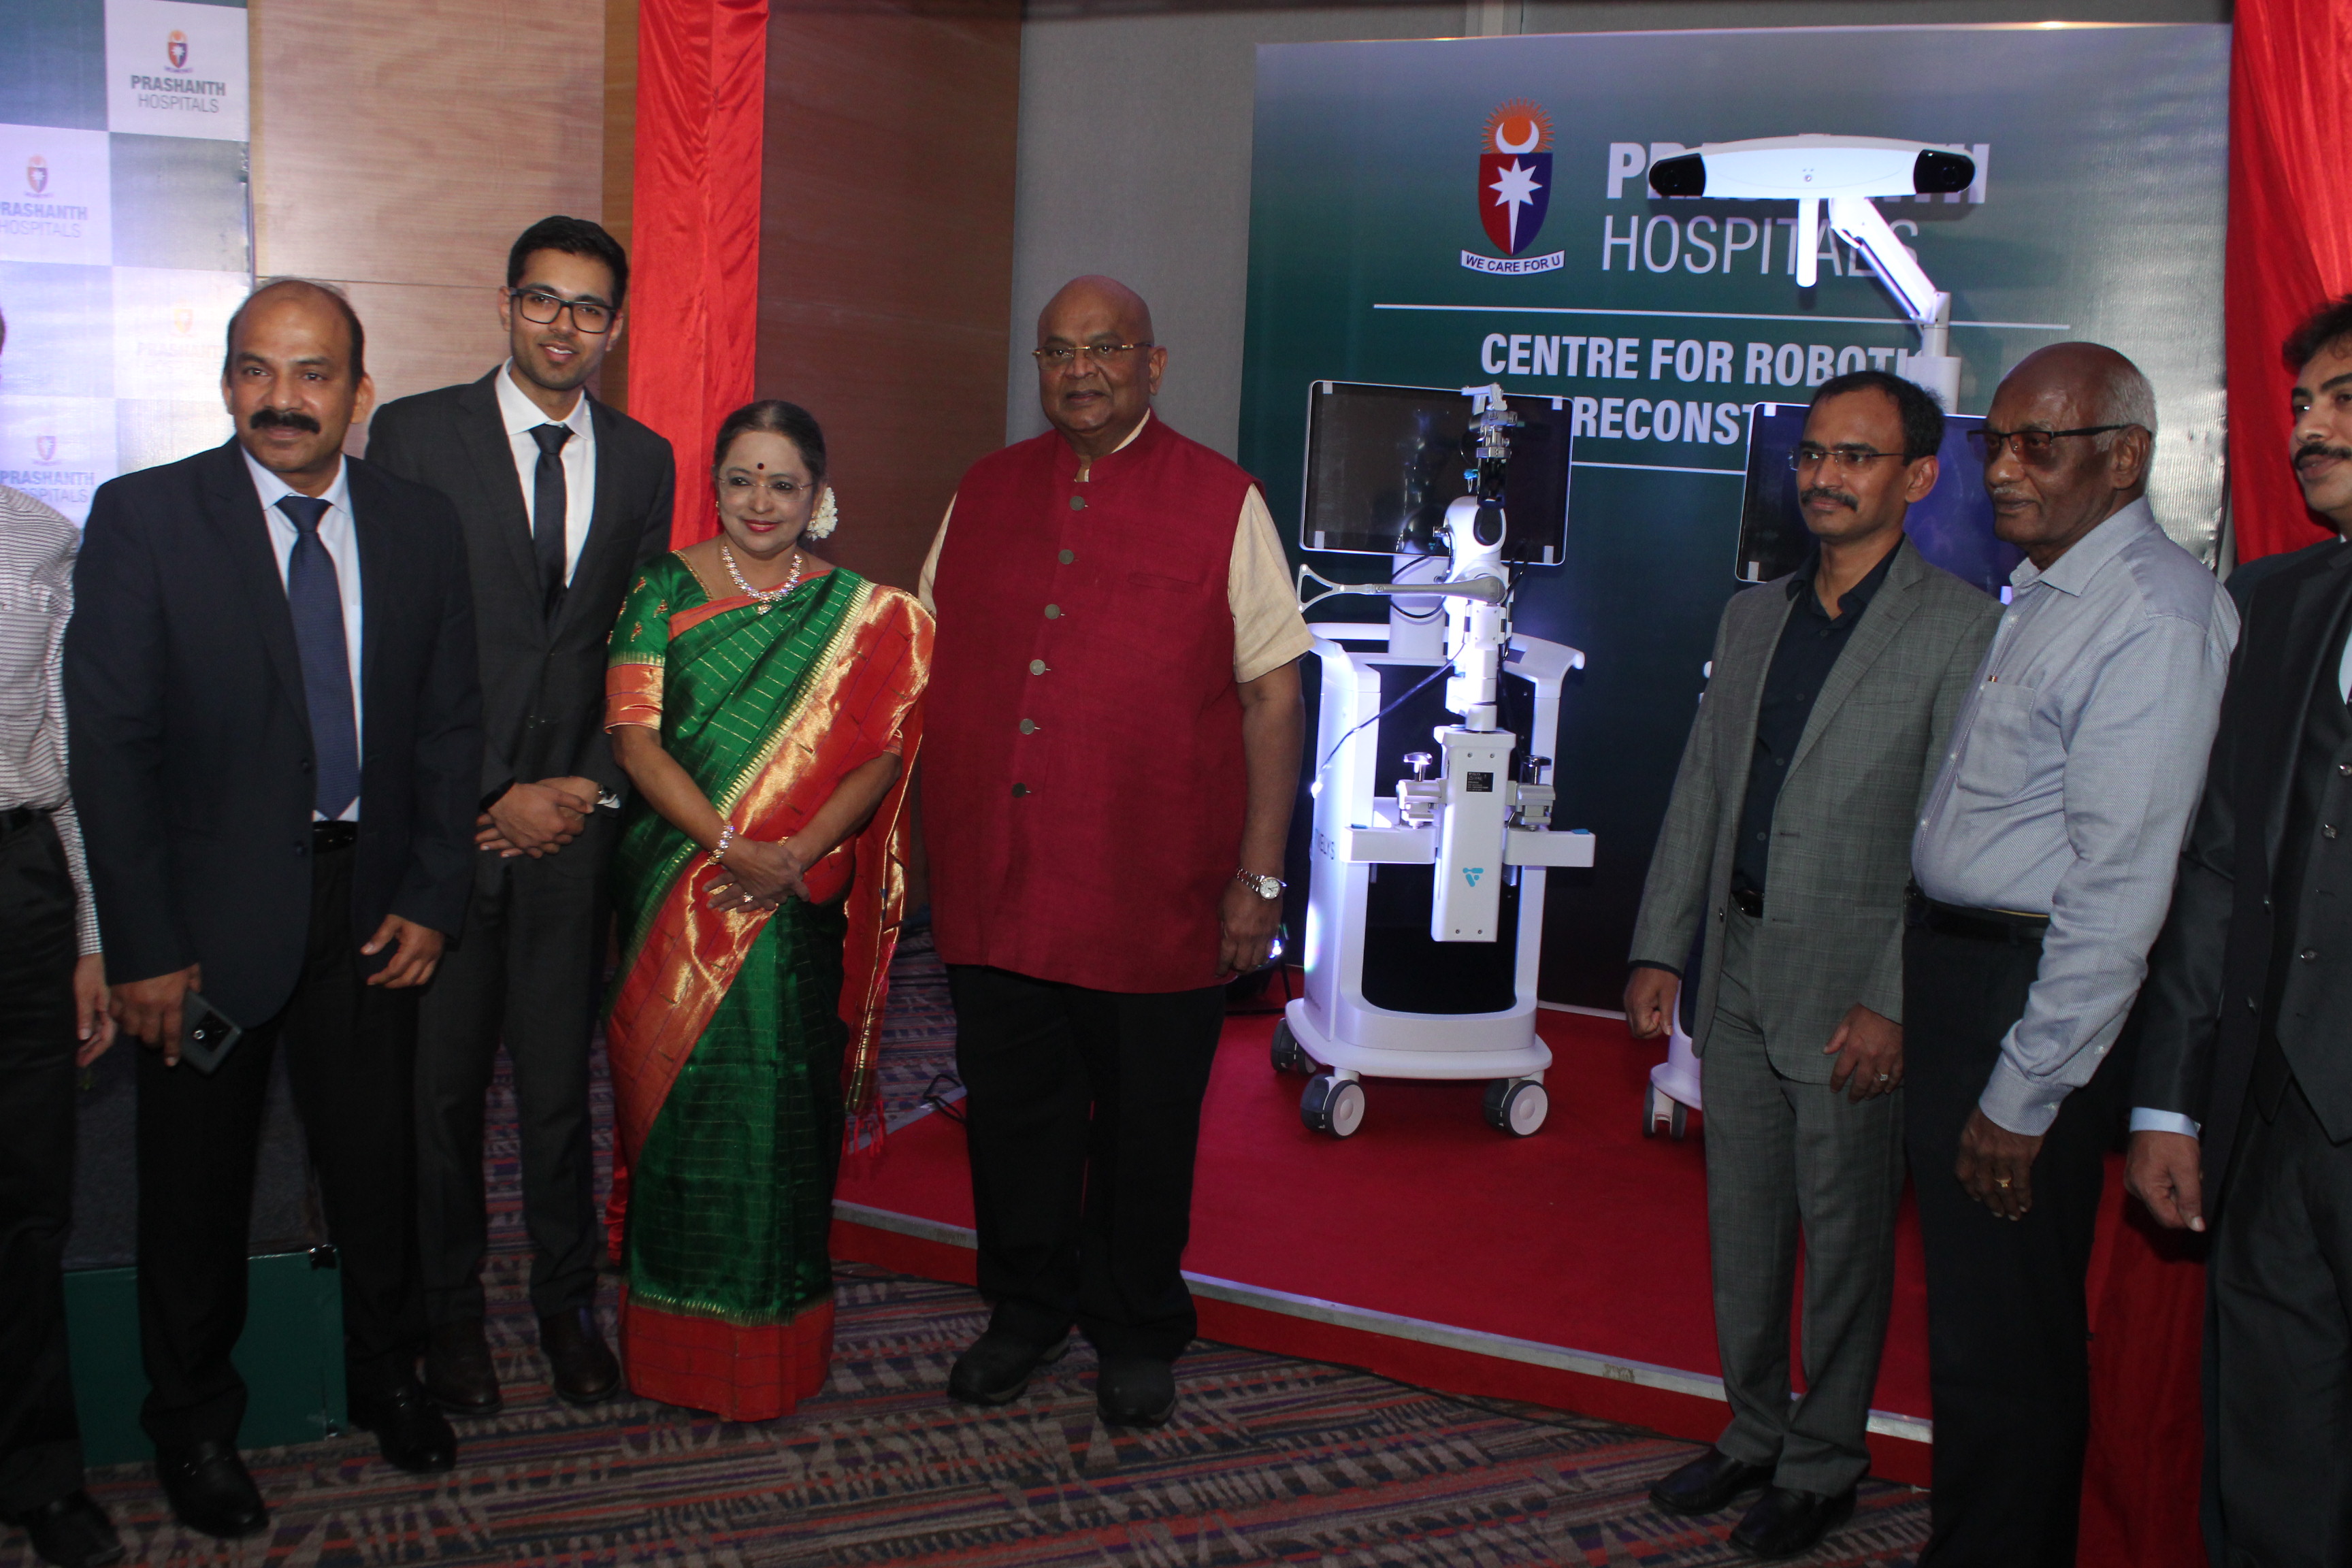 Prashanth Hospitals Brings to City a First-of-its-Kind, 4th Generation Robot for Joint Reconstruction